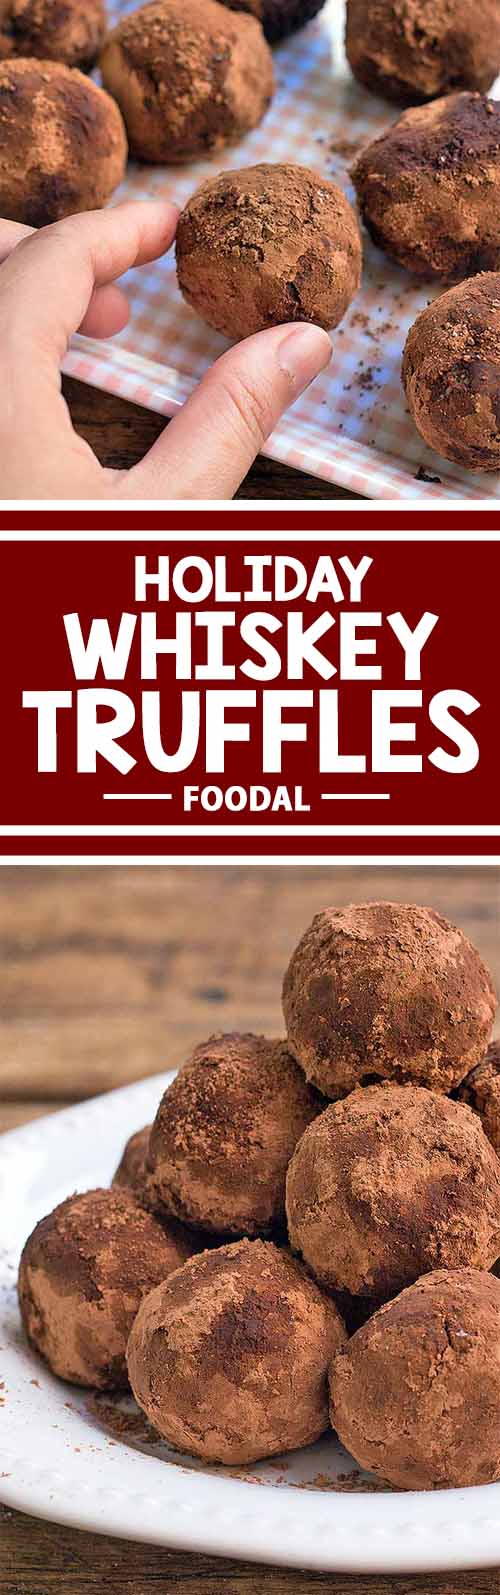 These whiskey truffles are rich and decadent, perfect for those of you who love whiskey. Soft on the inside, with a hint of whiskey flavor and a coating of cocoa powder, these truffles won’t last very long on the table. They’re bound to be a hit at your dinner party. Get the recipe from Foodal now and make a batch today!